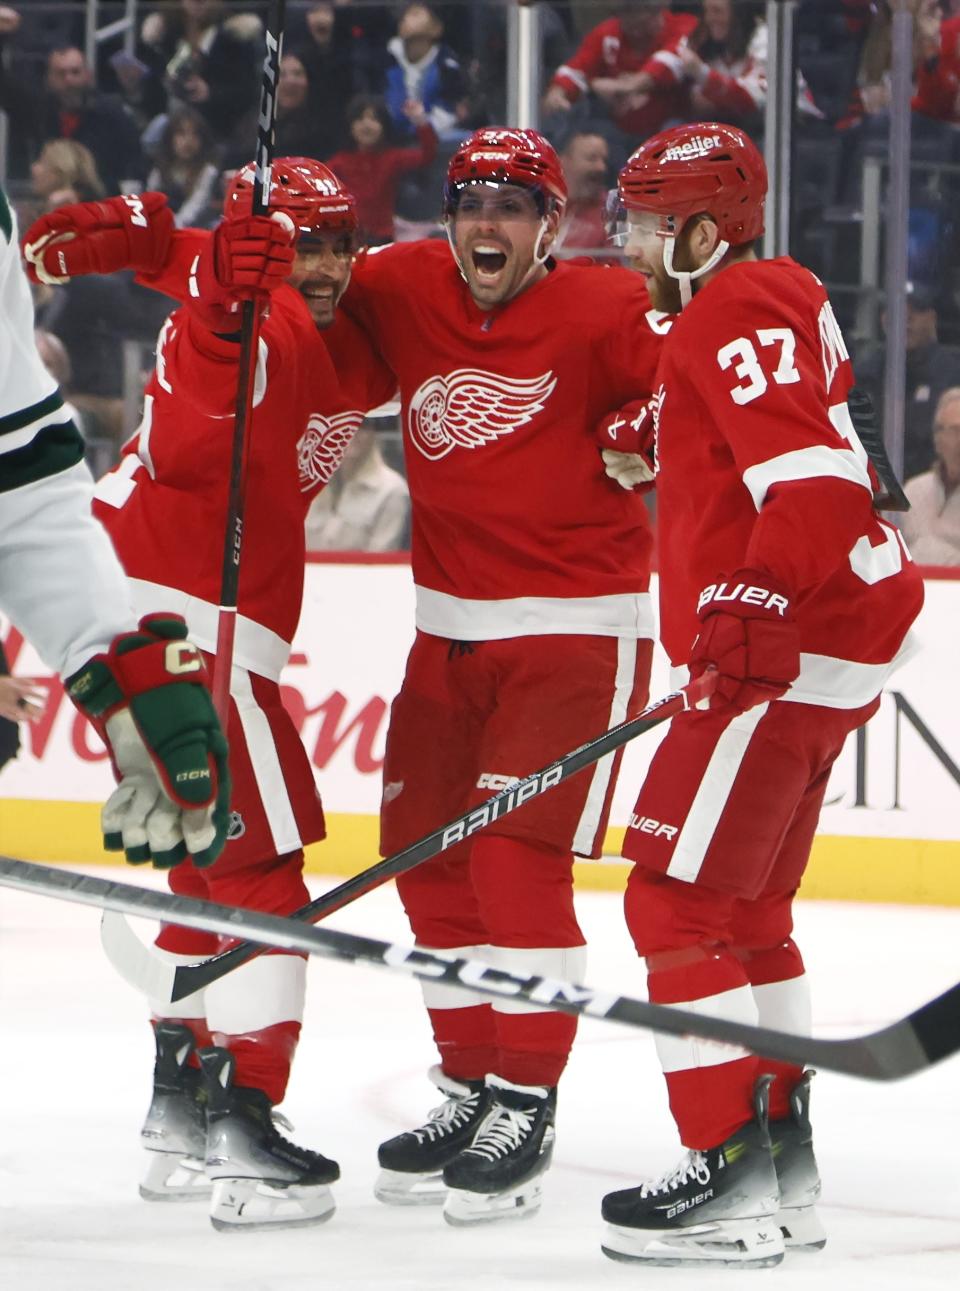 Detroit Red Wings left wing David Perron, center, celebrates his goal against the Minnesota Wild with defenseman Shayne Gostisbehere (41) and left wing J.T. Compher (37) during the first period of an NHL hockey game Sunday, Nov. 26, 2023, in Detroit. (AP Photo/Duane Burleson)